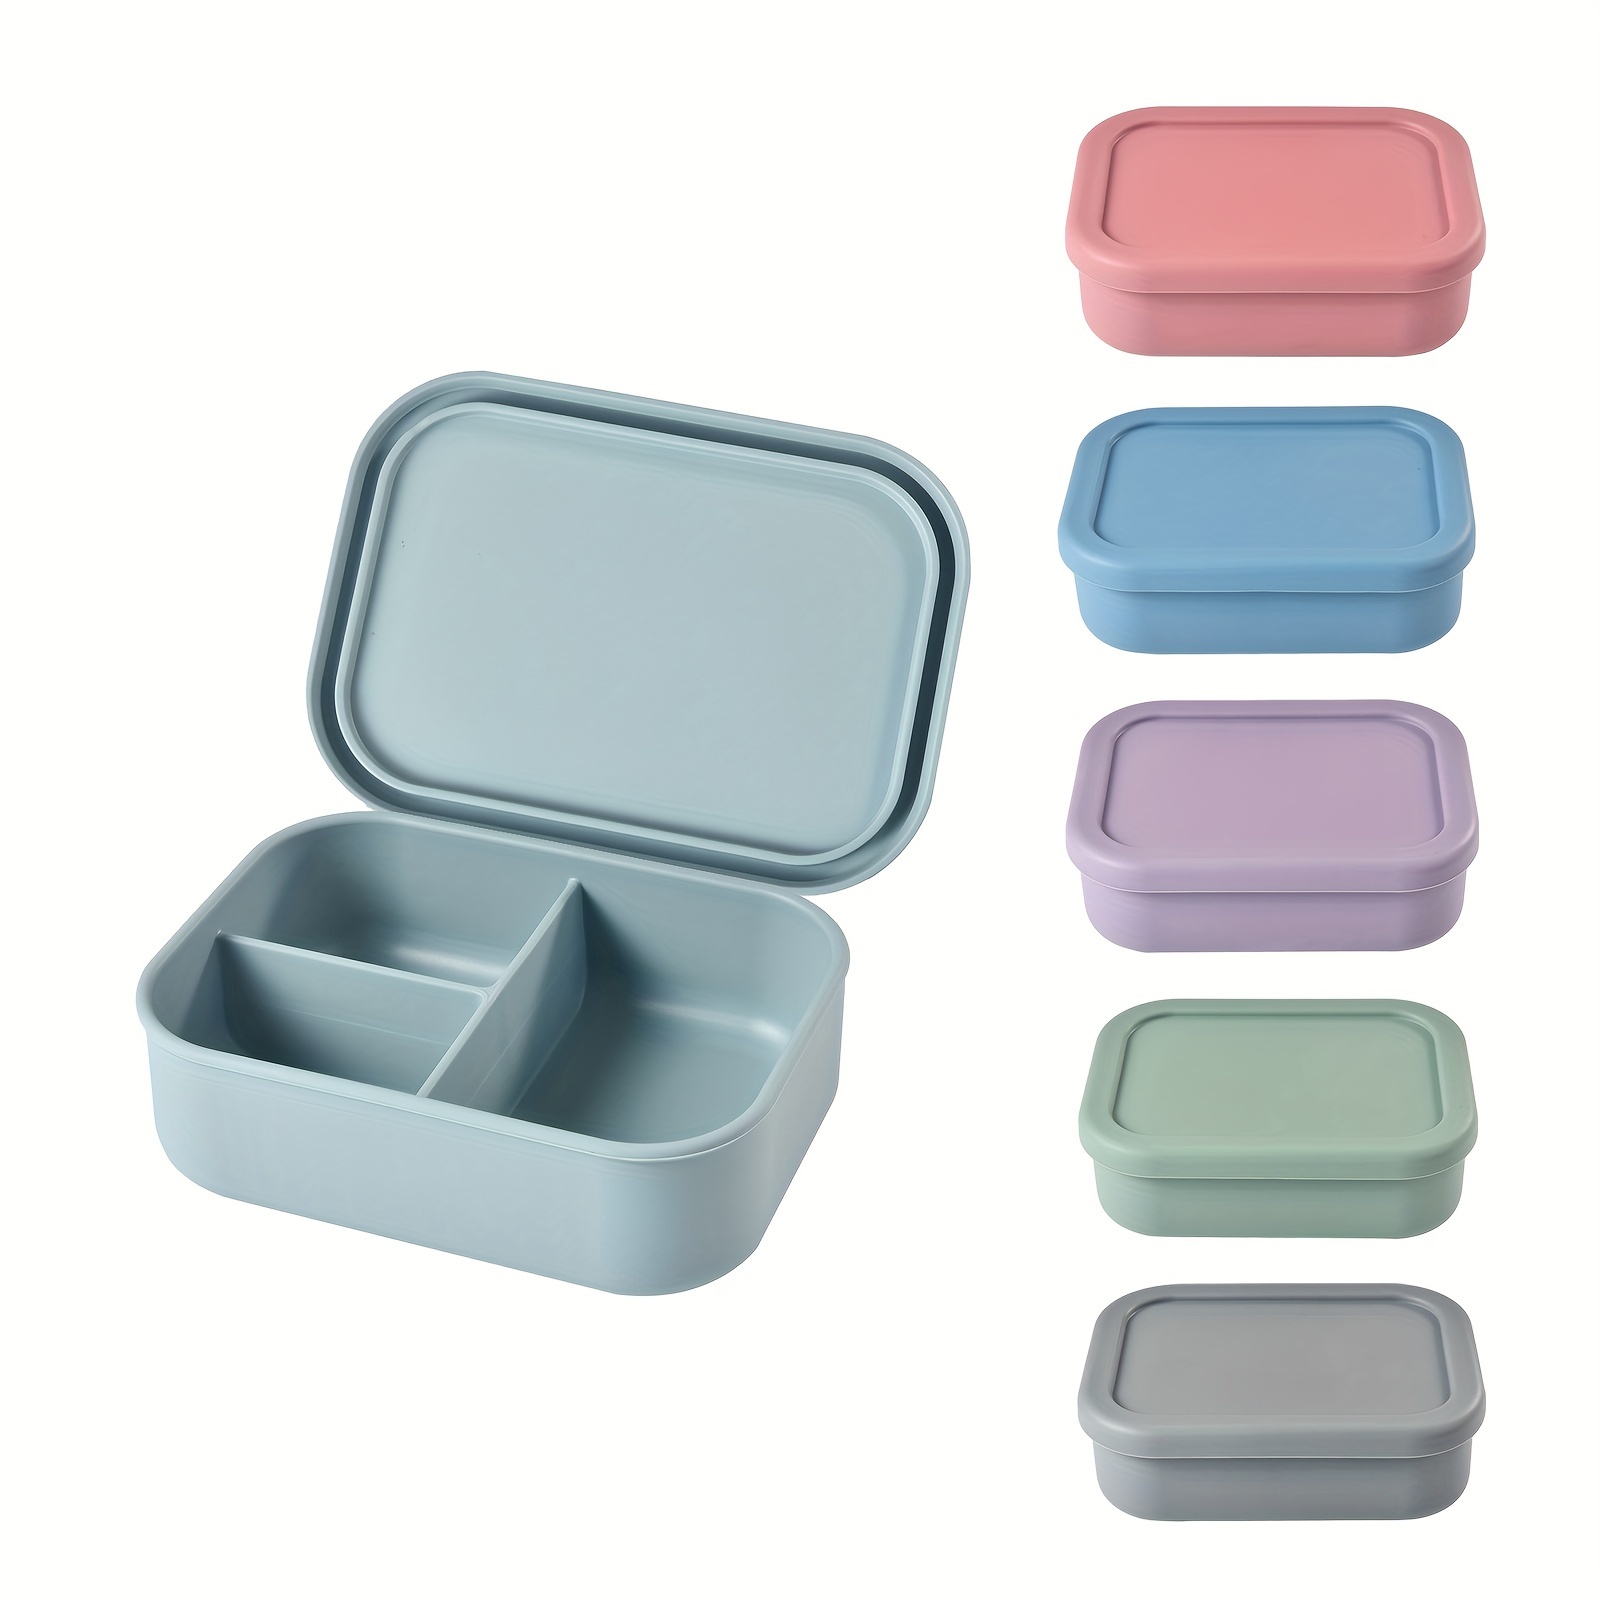 

1pc, Silicone Lunch Box, Leak Proof Bento Box, 3 Compartments Food Container, Microwave Safe, For School Students And Office Workers, Kitchen Gadgets, Kitchen Accessories, Travel Accessories